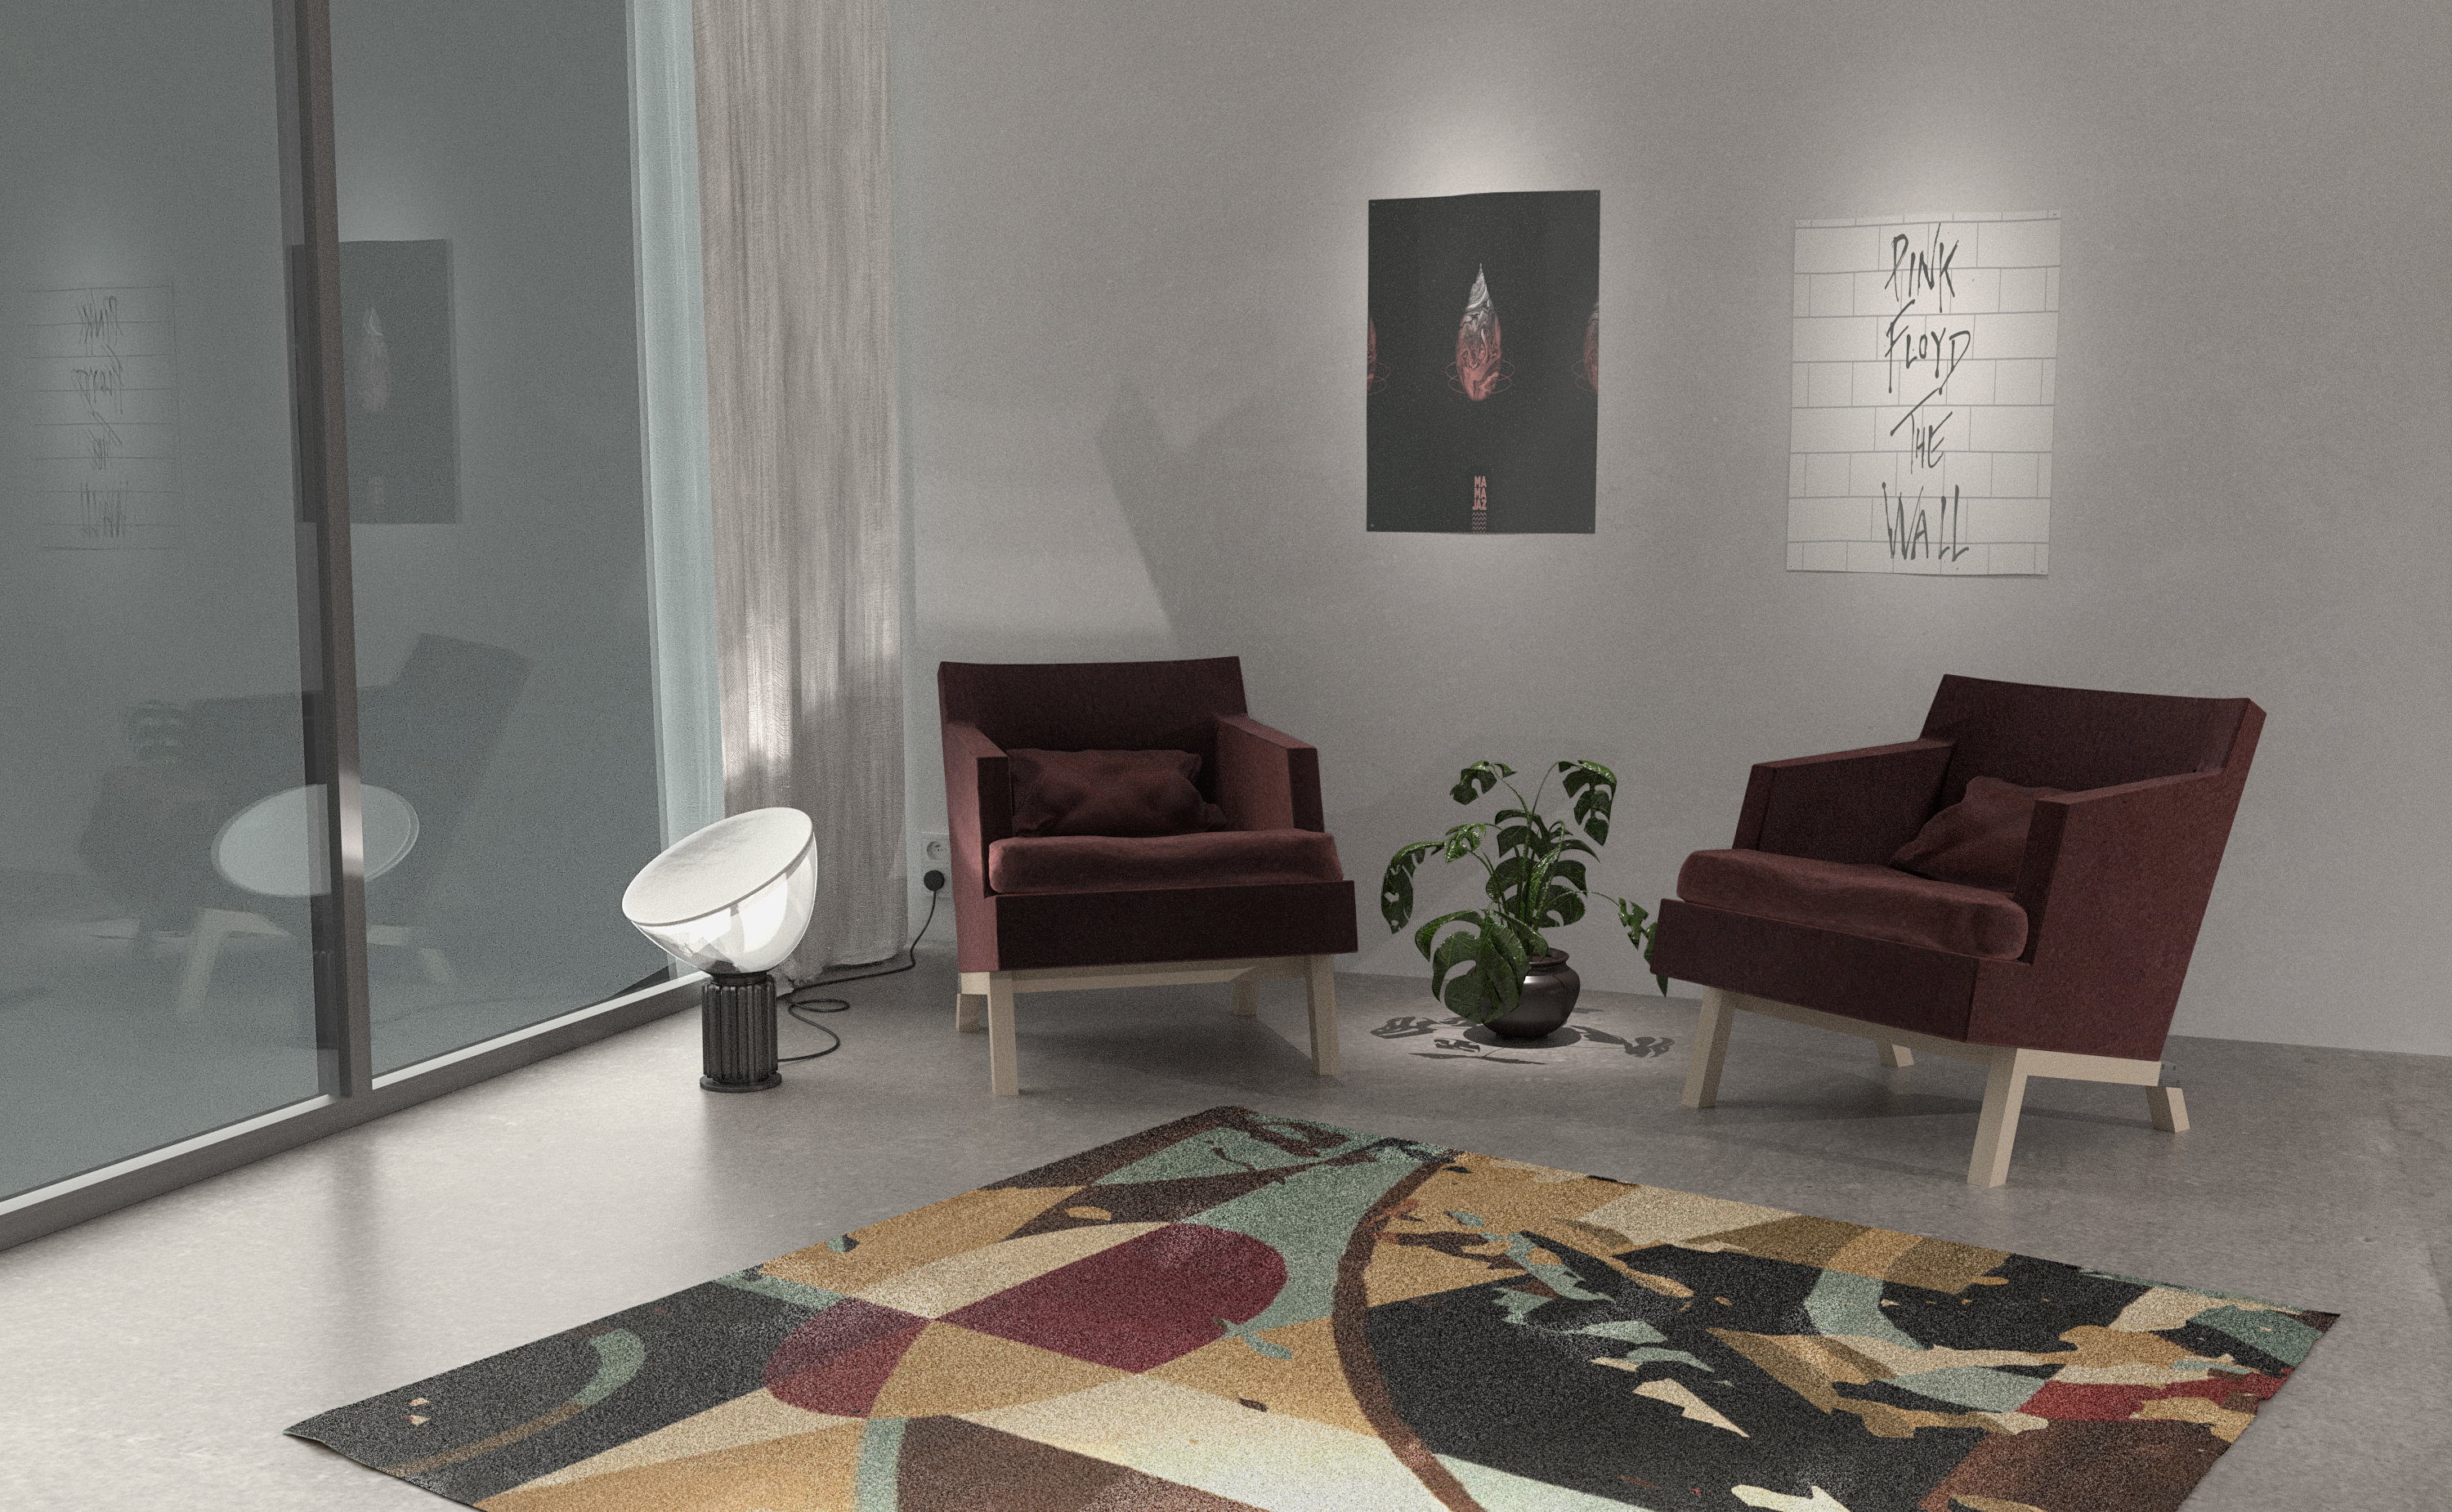 Blender visualization of armchairs.